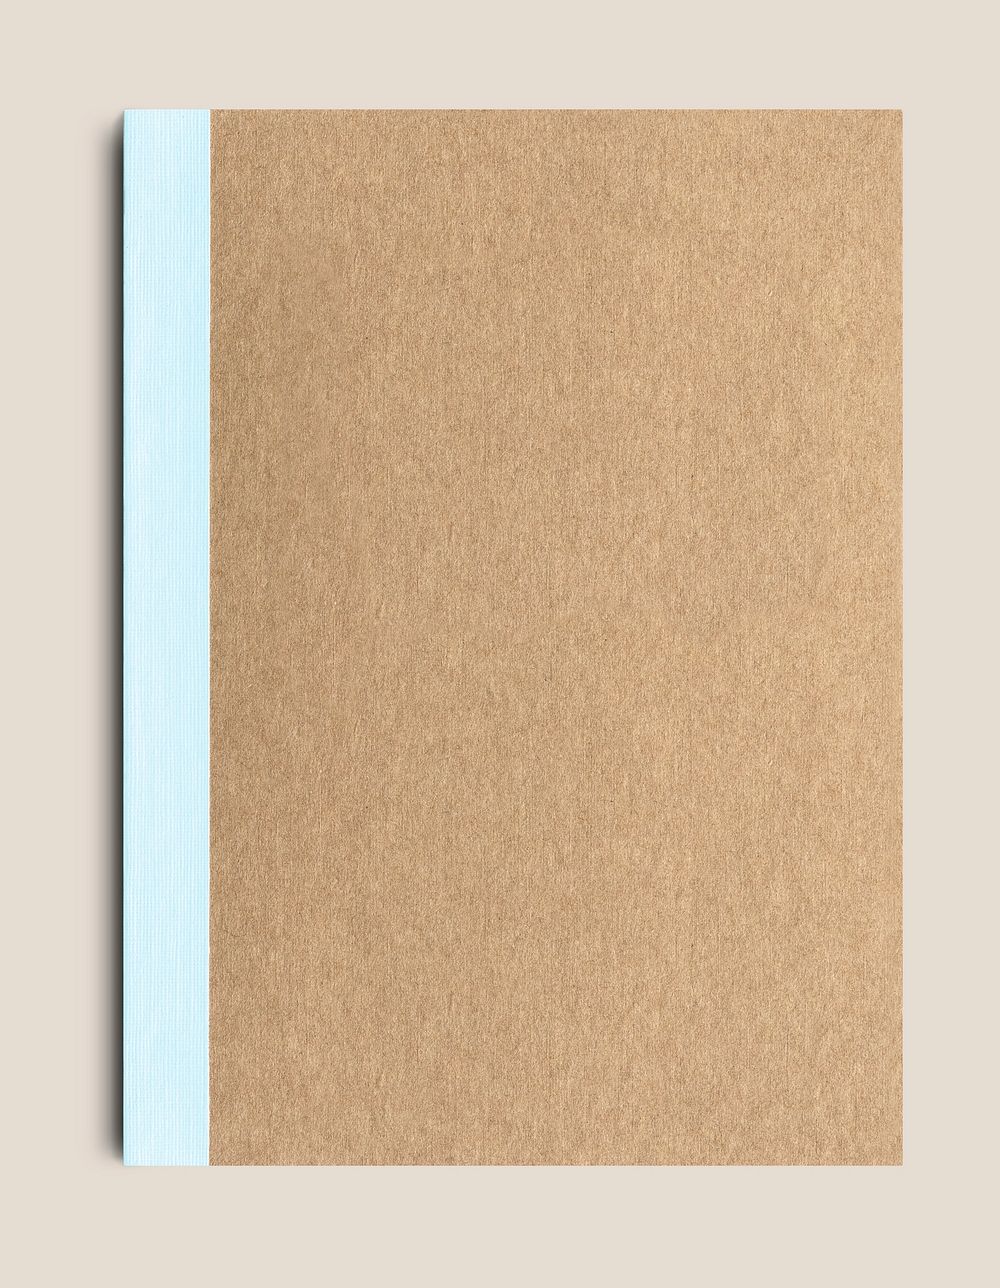 Blank brown book cover mockup